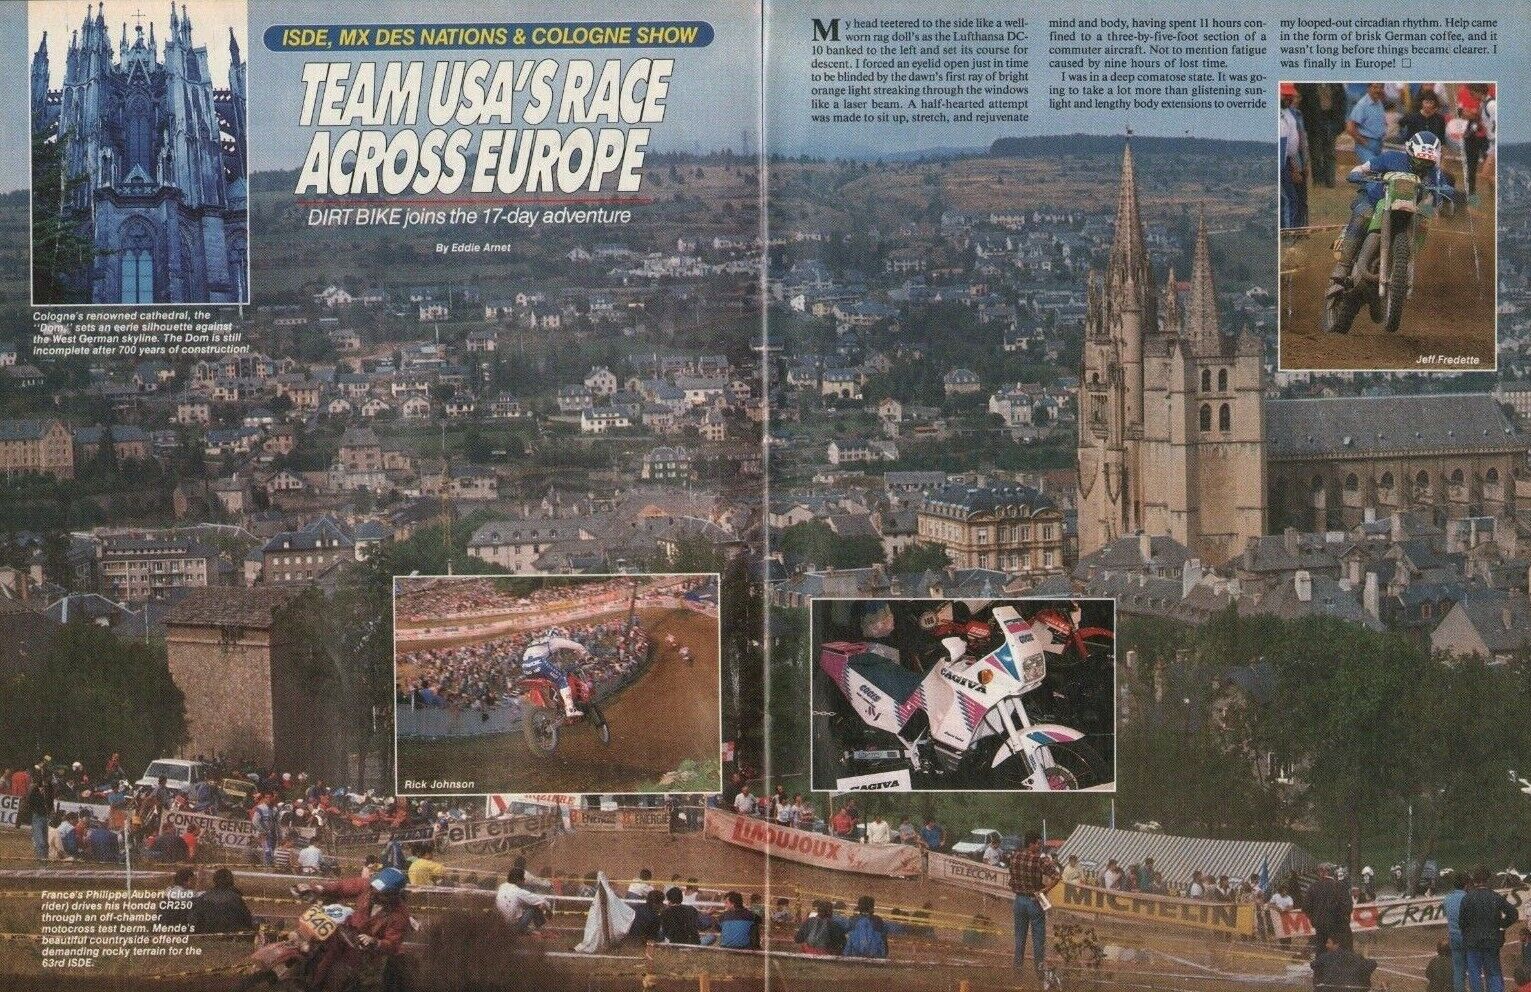 1988 Team Usa Europe Isde, Mx Des Nations, Cologne - 13-page Motorcycle Article